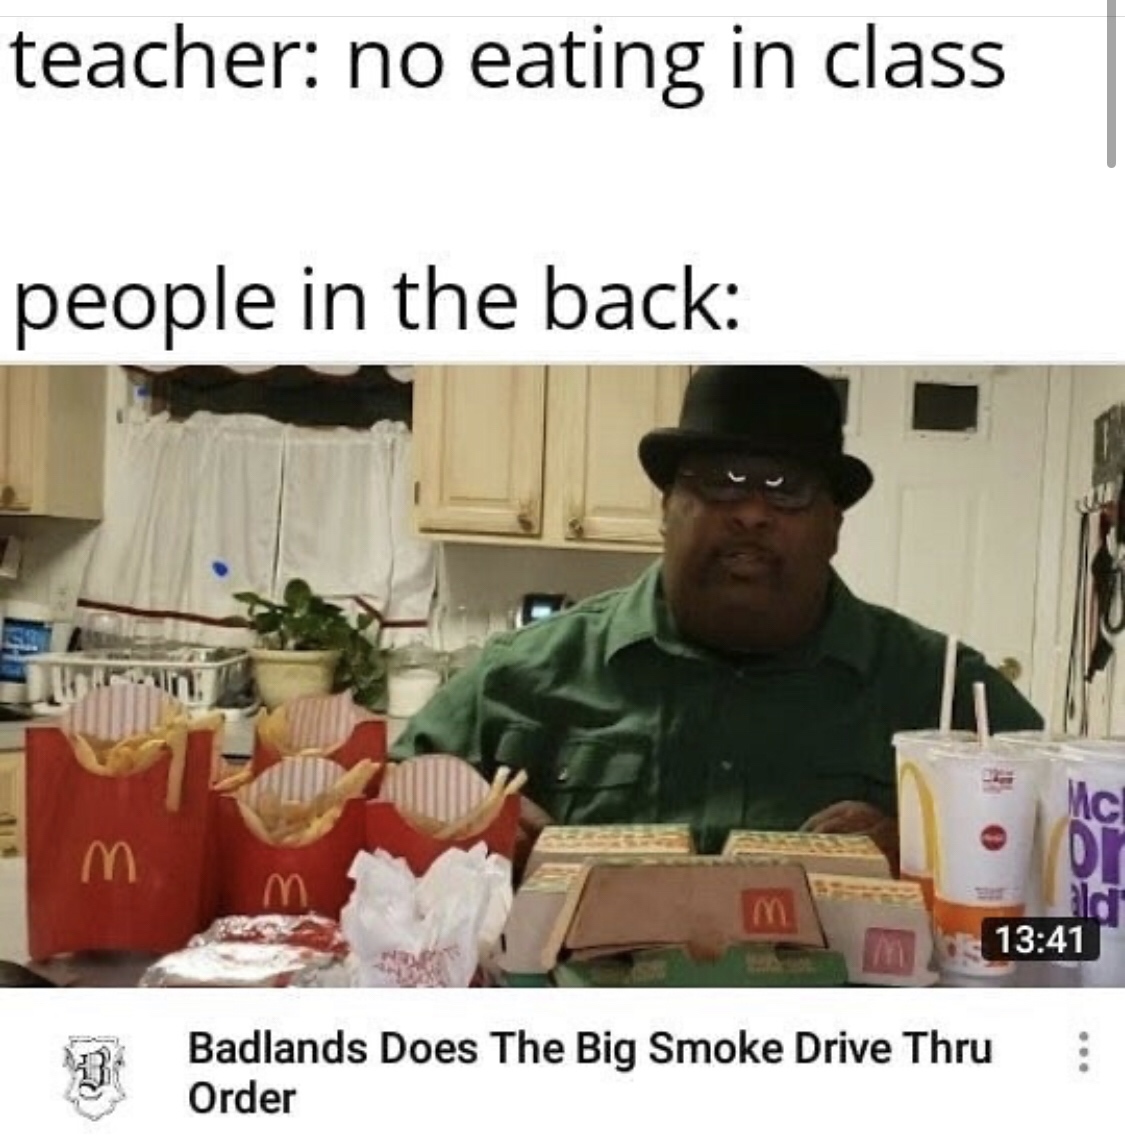 badlands chugs big smoke - teacher no eating in class people in the back Badlands Does The Big Smoke Drive Thru Order